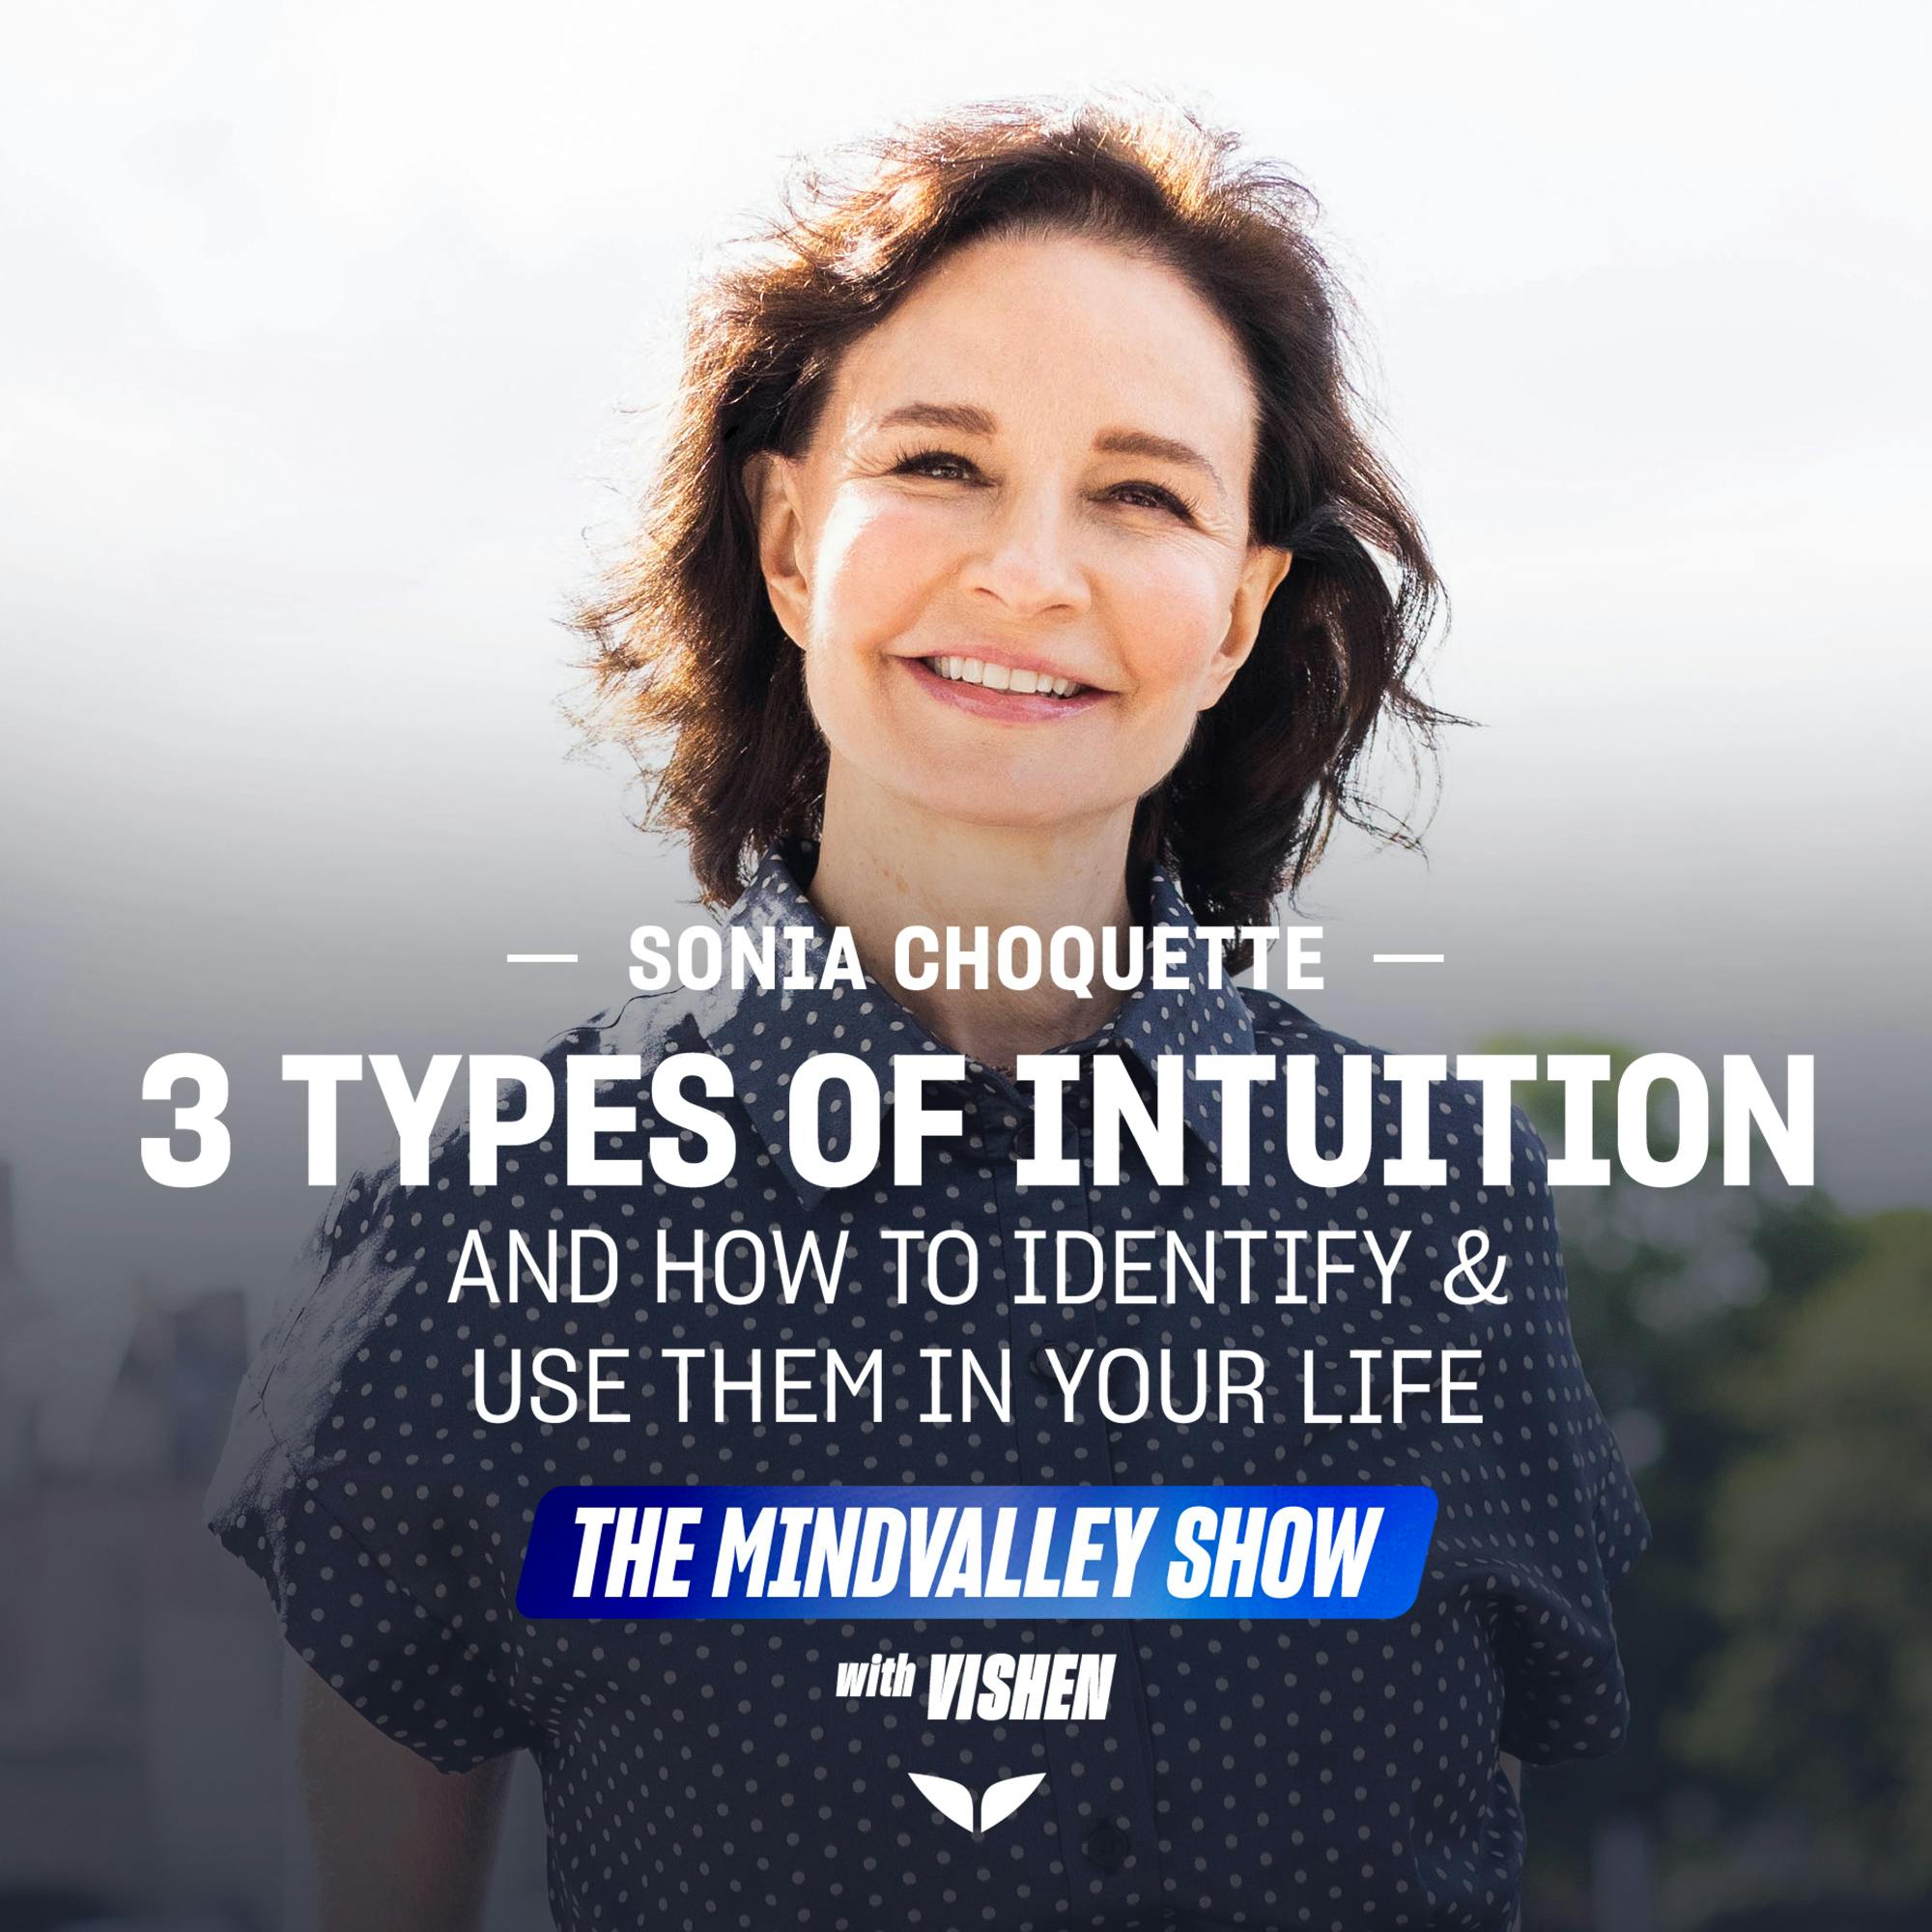 3 Types of Intuition And How to Identify & Use Them in Your Life | Sonia Choquette